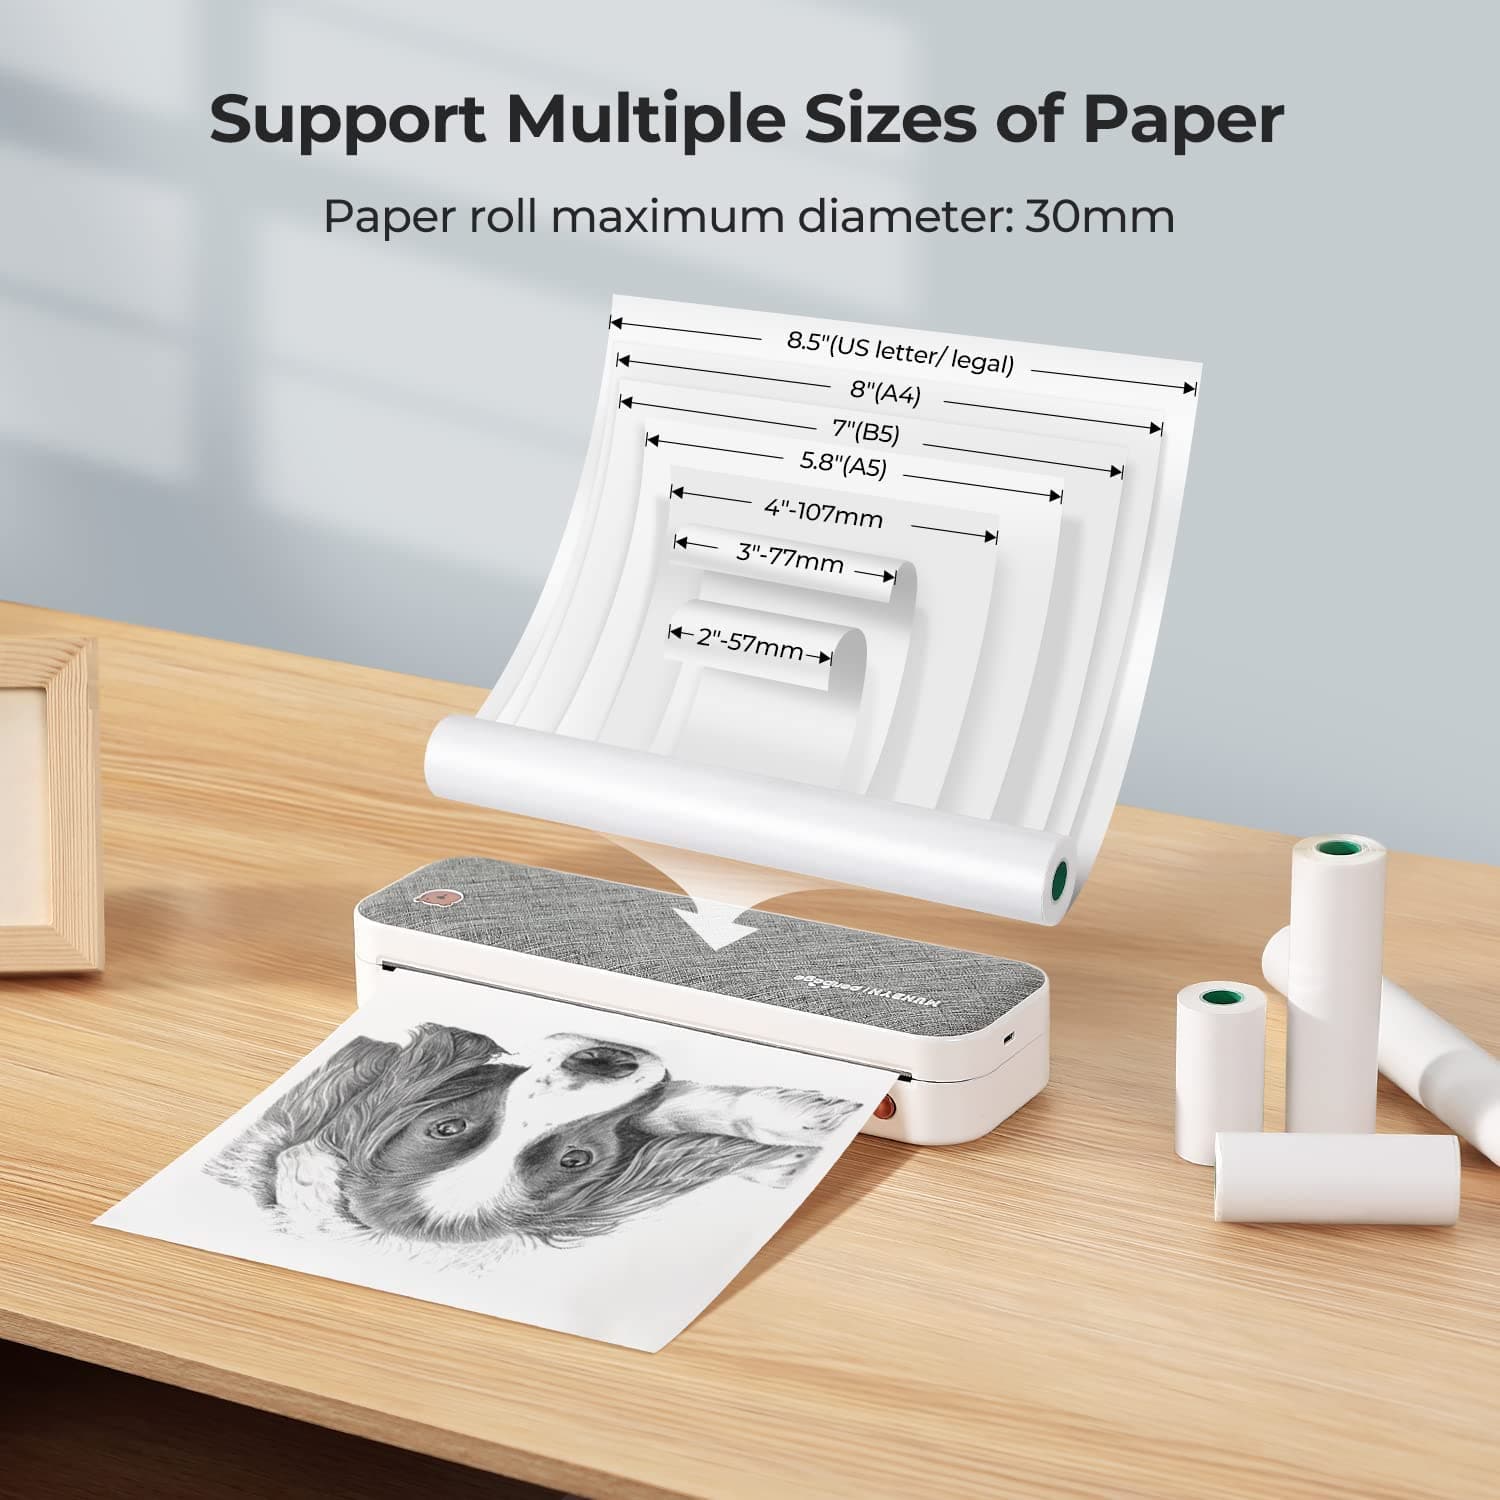 MUNBYN A4 portable thermal printer supports multiple sizes of thermal paper.